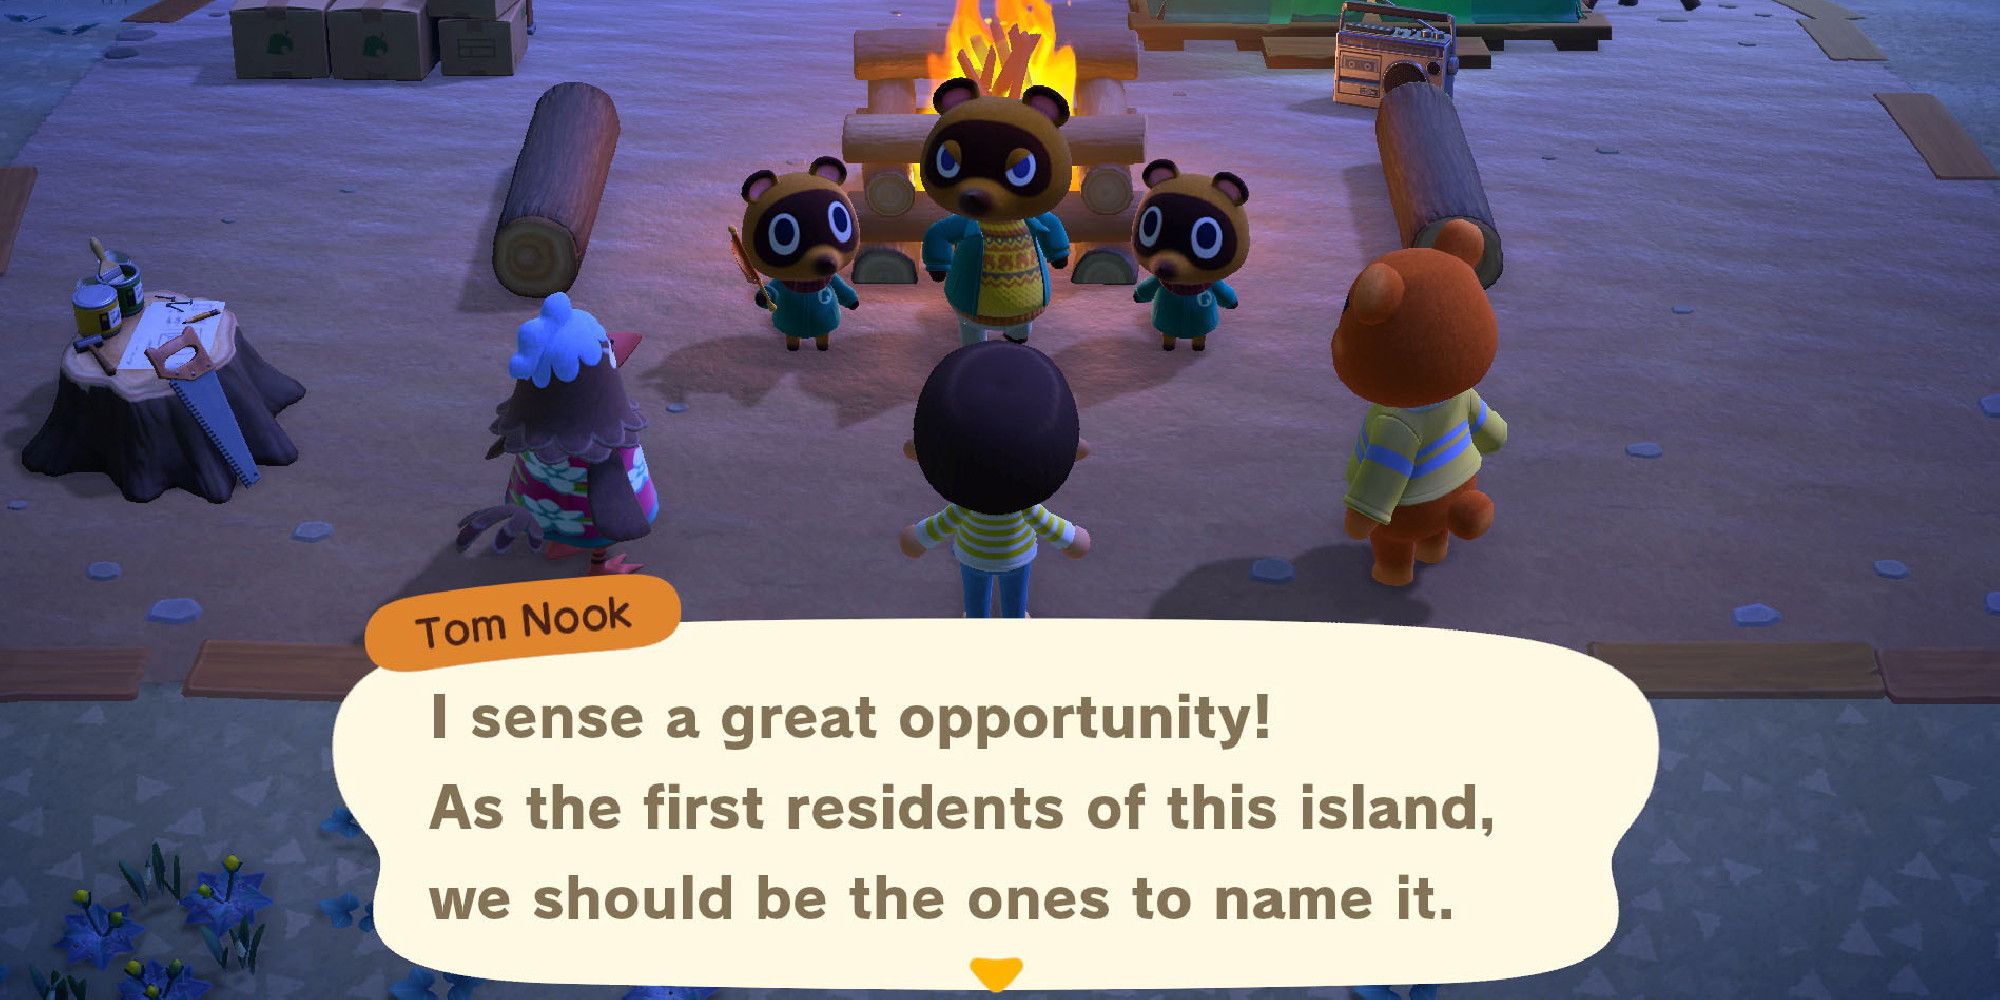 Tom Nook Asks the Player to Name the Island